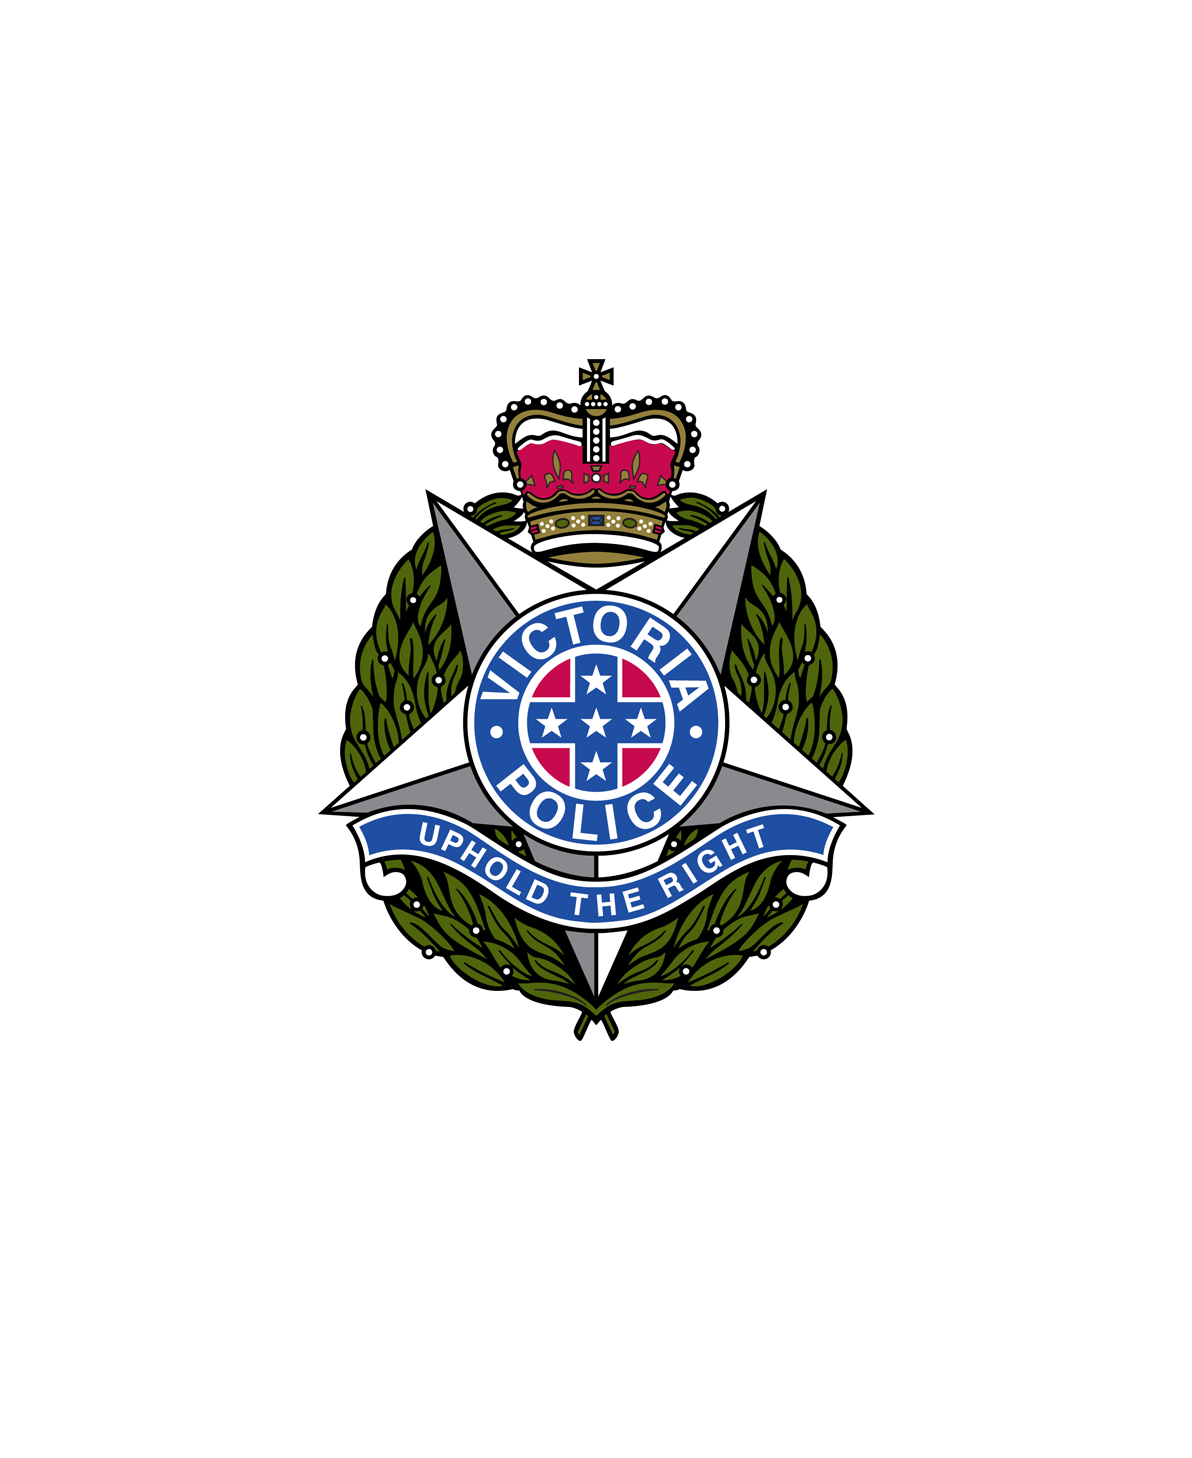 Image of Victoria Police